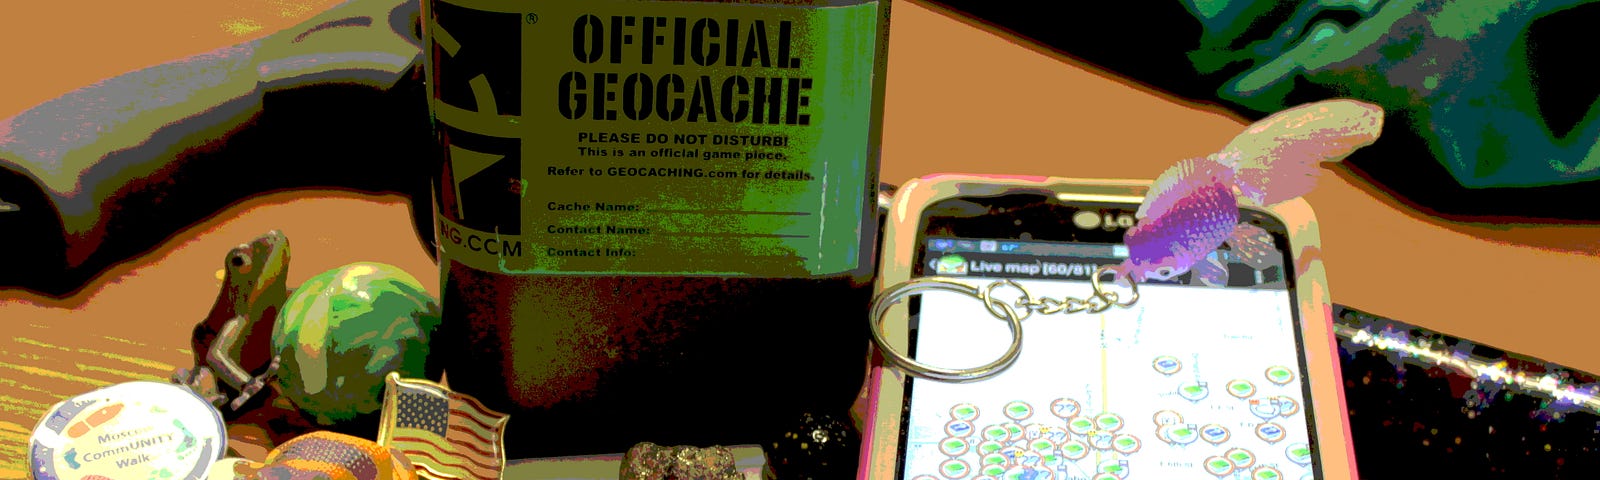 Photo of small geocache container surrounded by small knick knacks, next to a smartphone with a map displayed on the screen